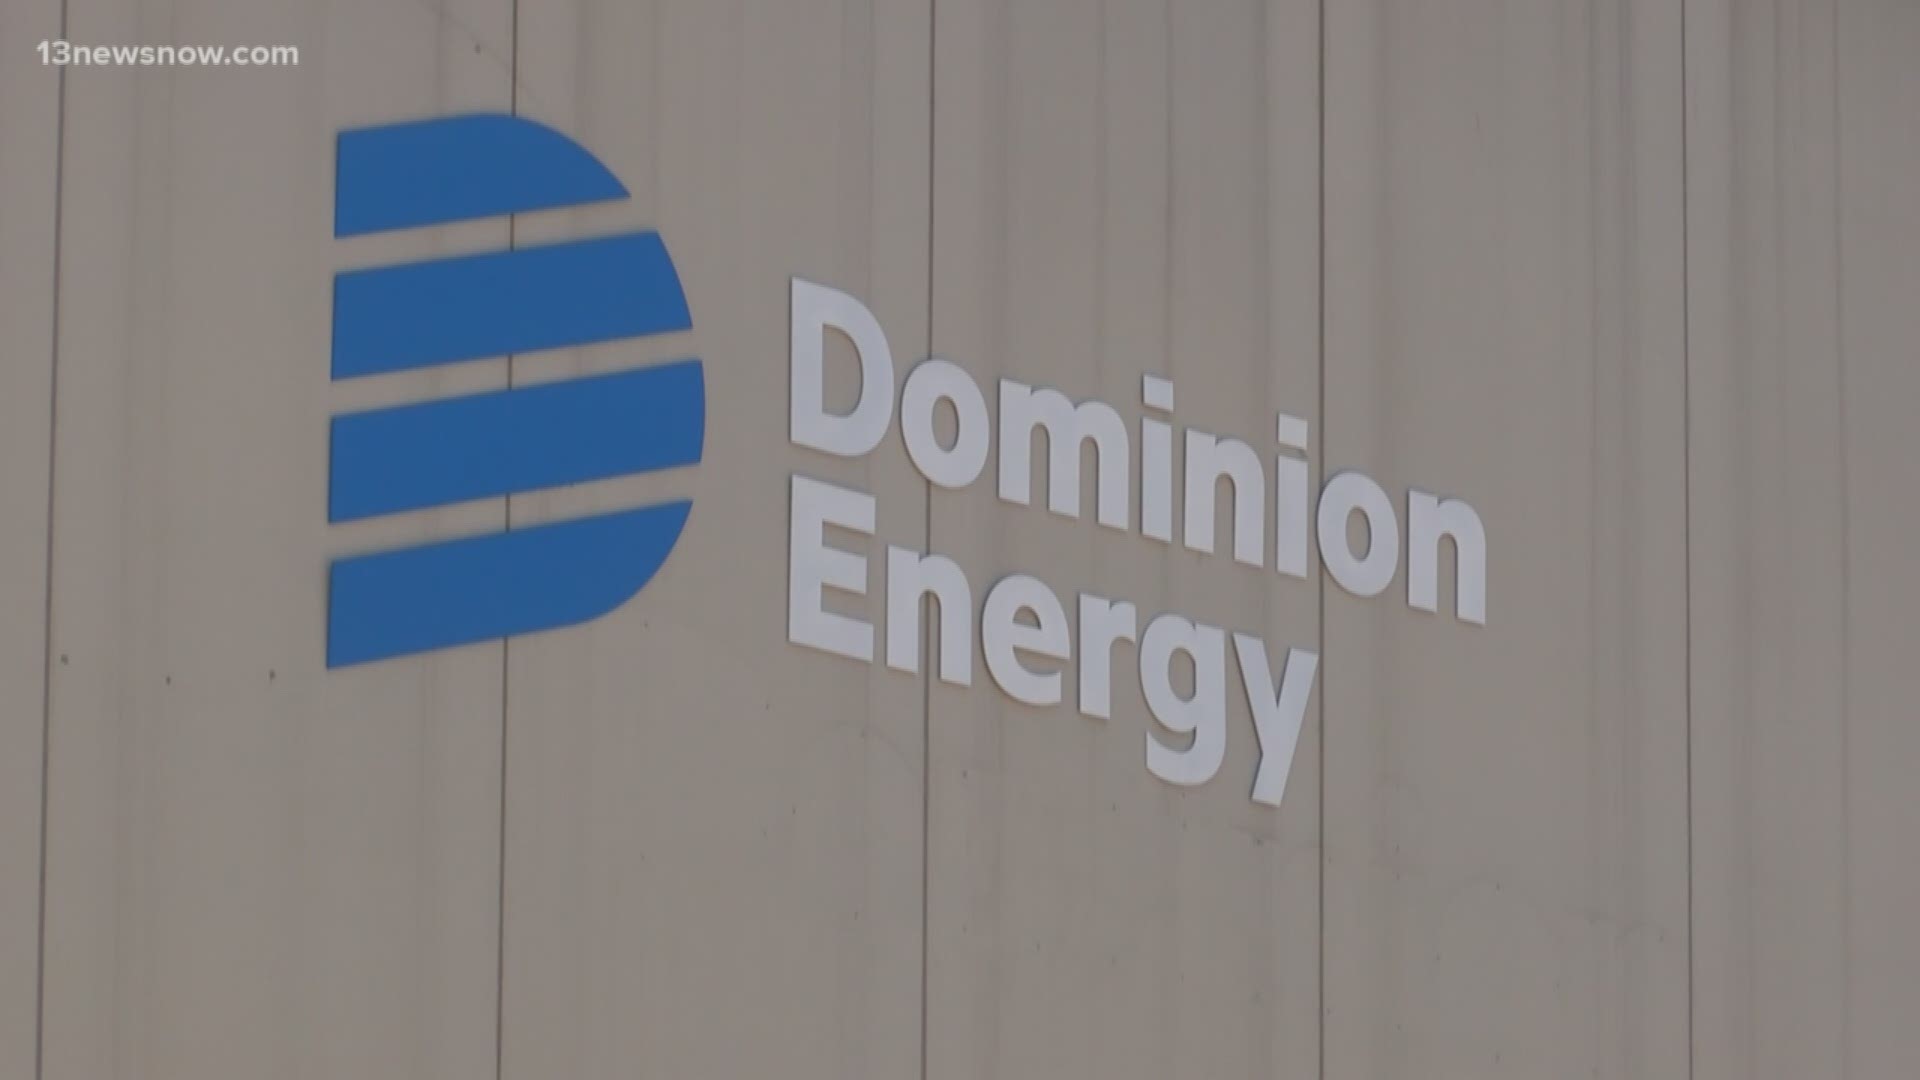 Many people are losing their jobs as businesses shut down to prevent the spread of COVID-19. Knowing this, Dominion Energy has said it will not cut their power off.